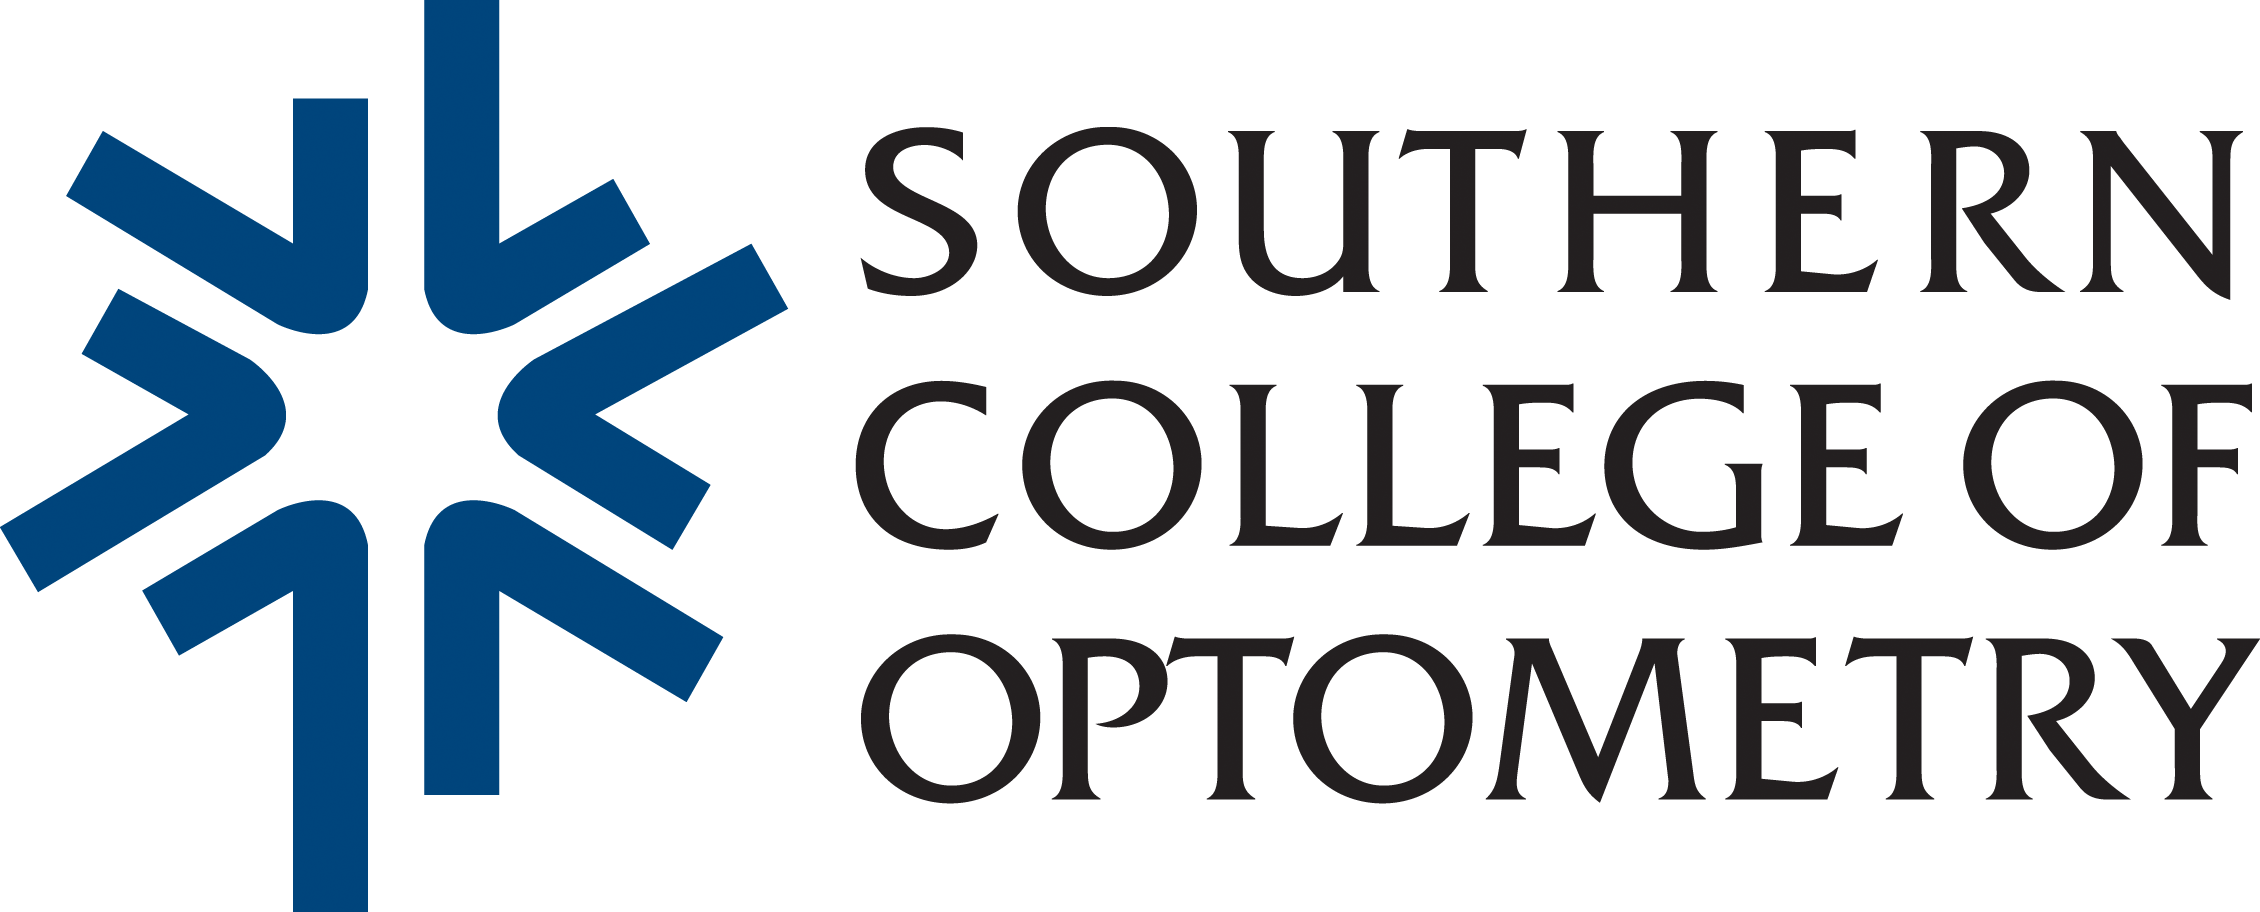 Southern College of Optometry Profile